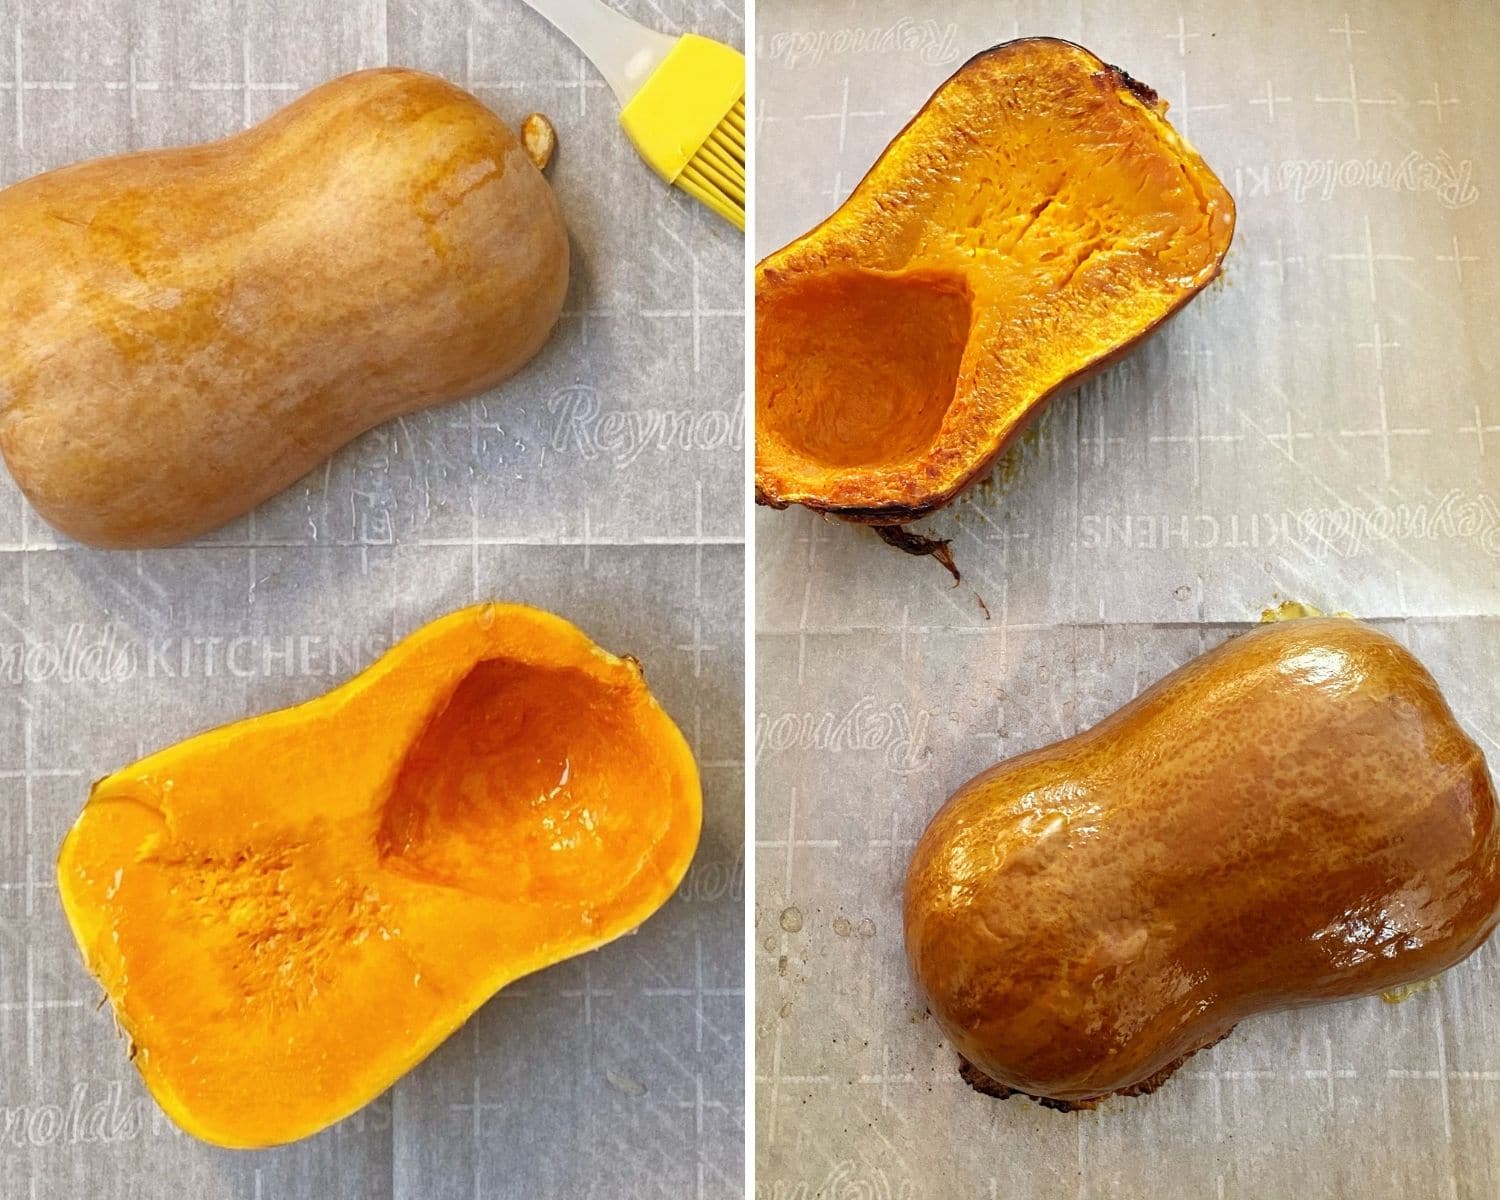 prepped squash before and after baking